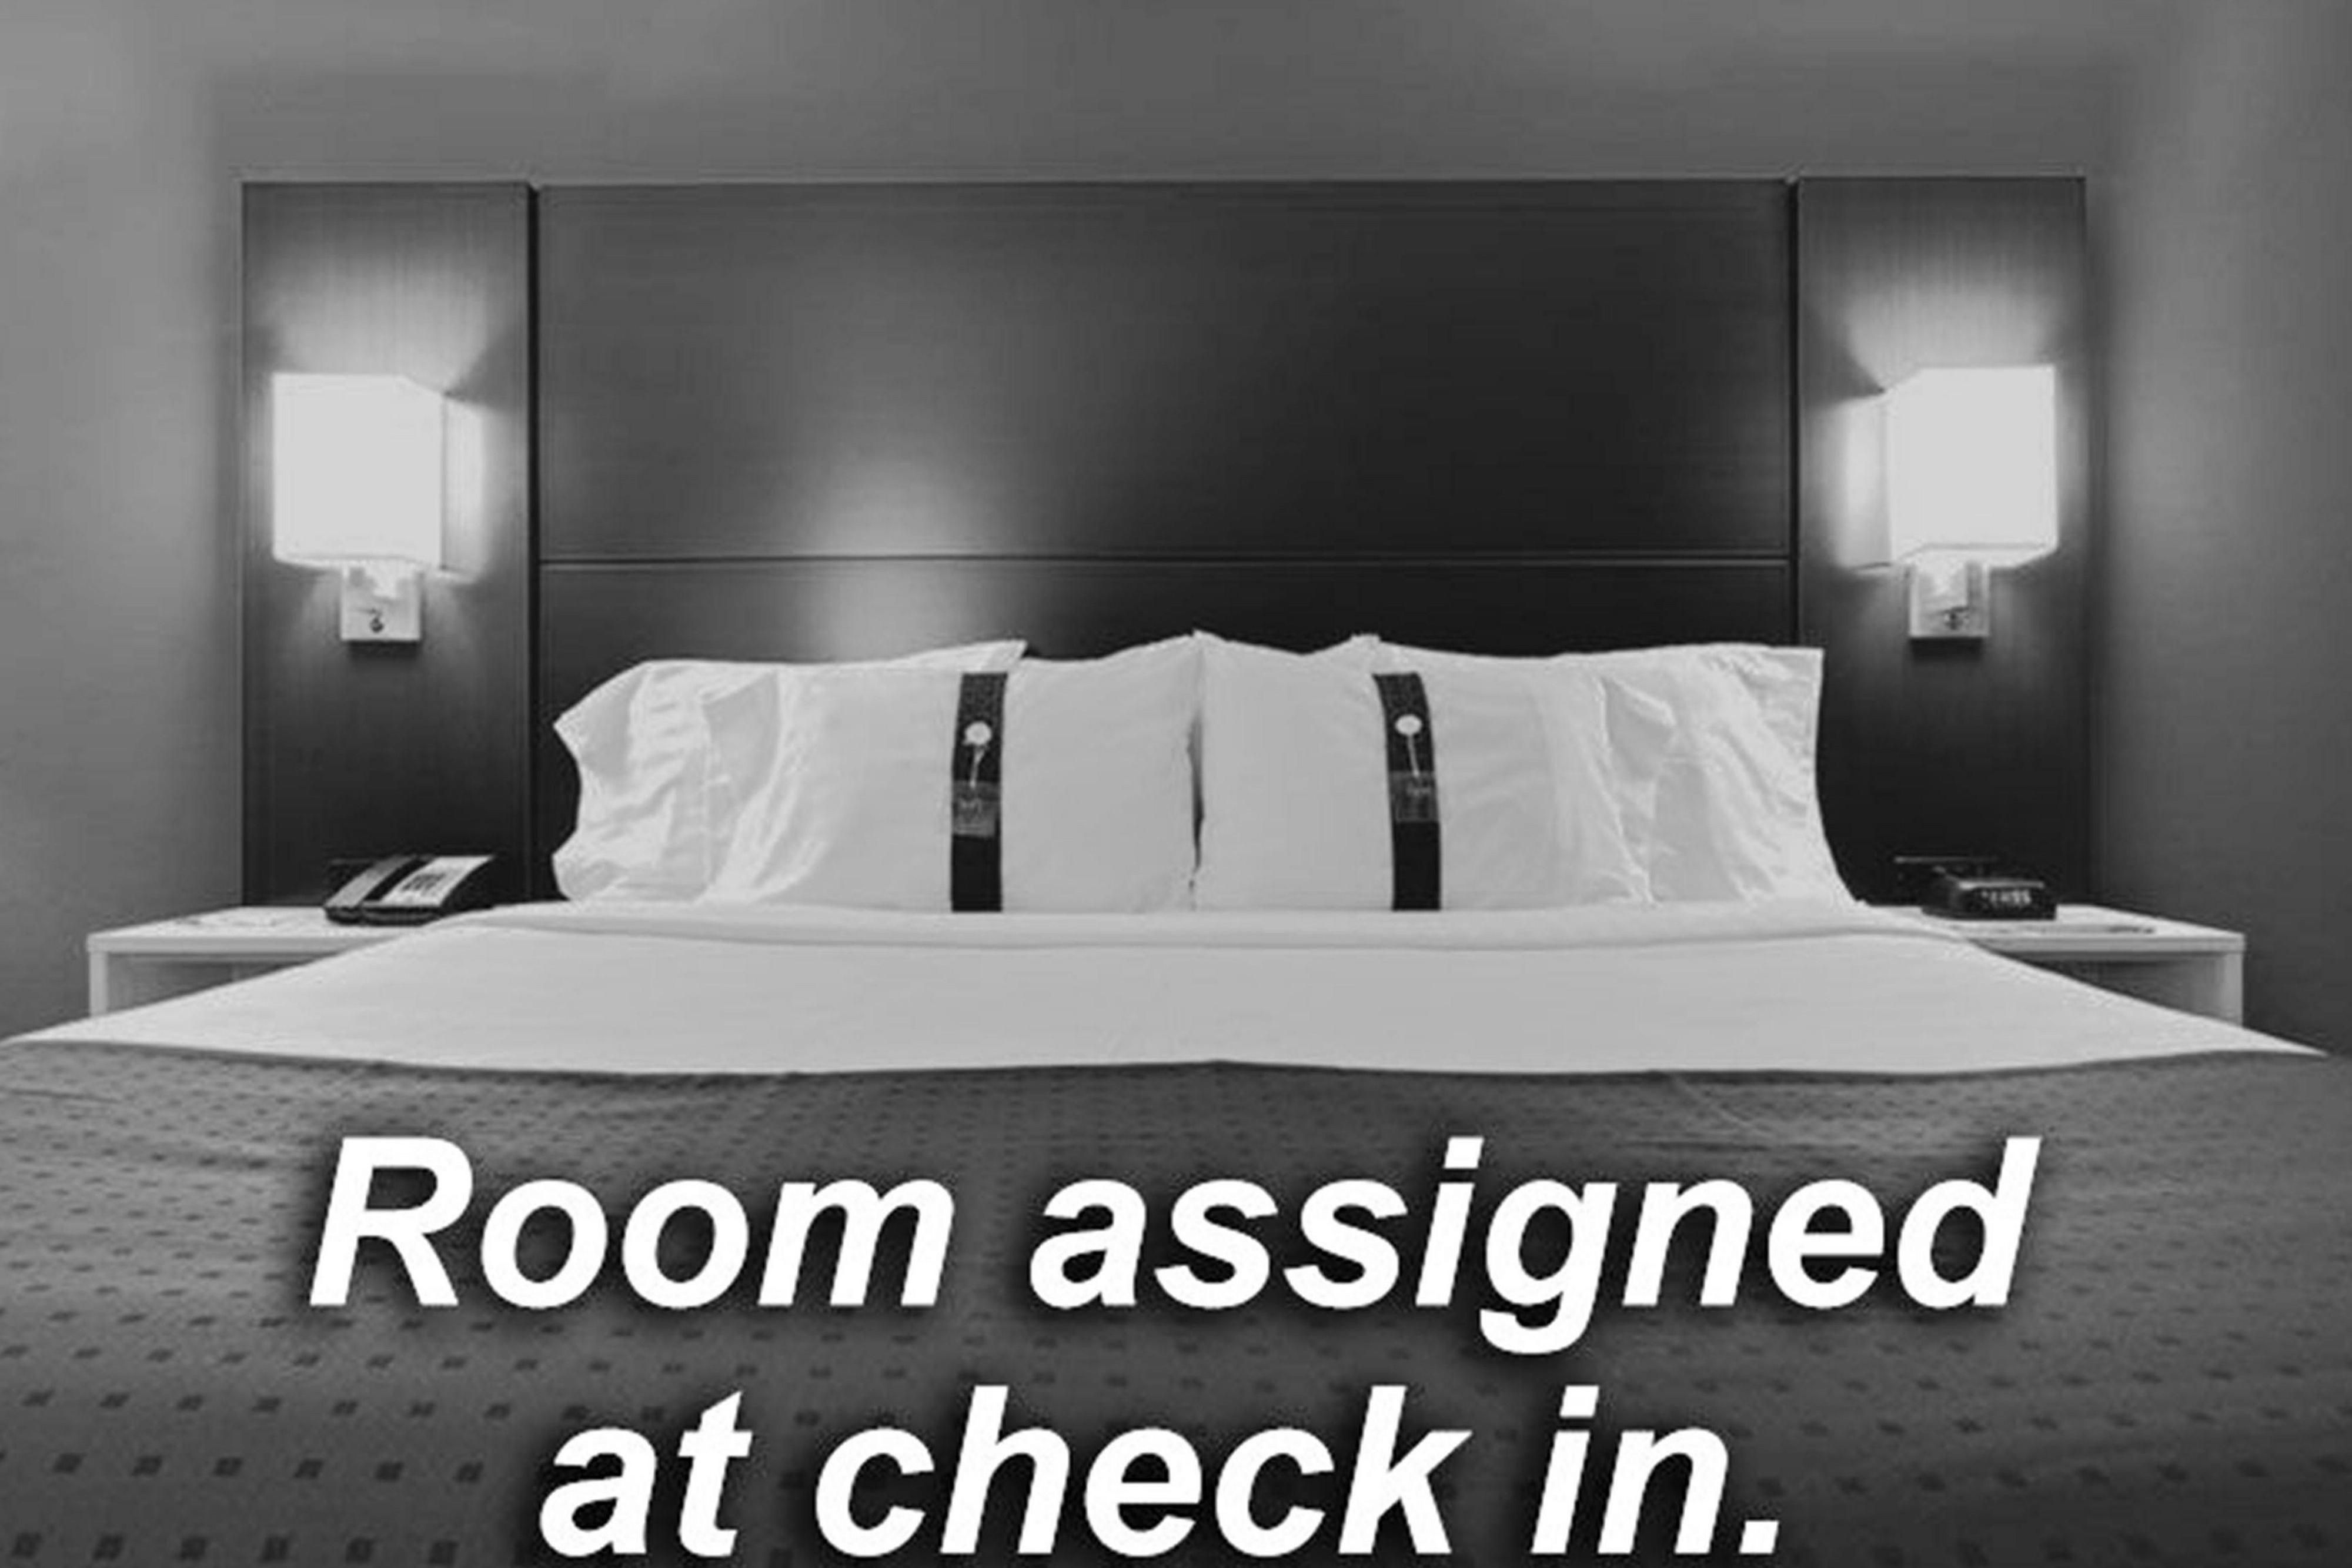 Non room type guarantee will be assigned at check-in